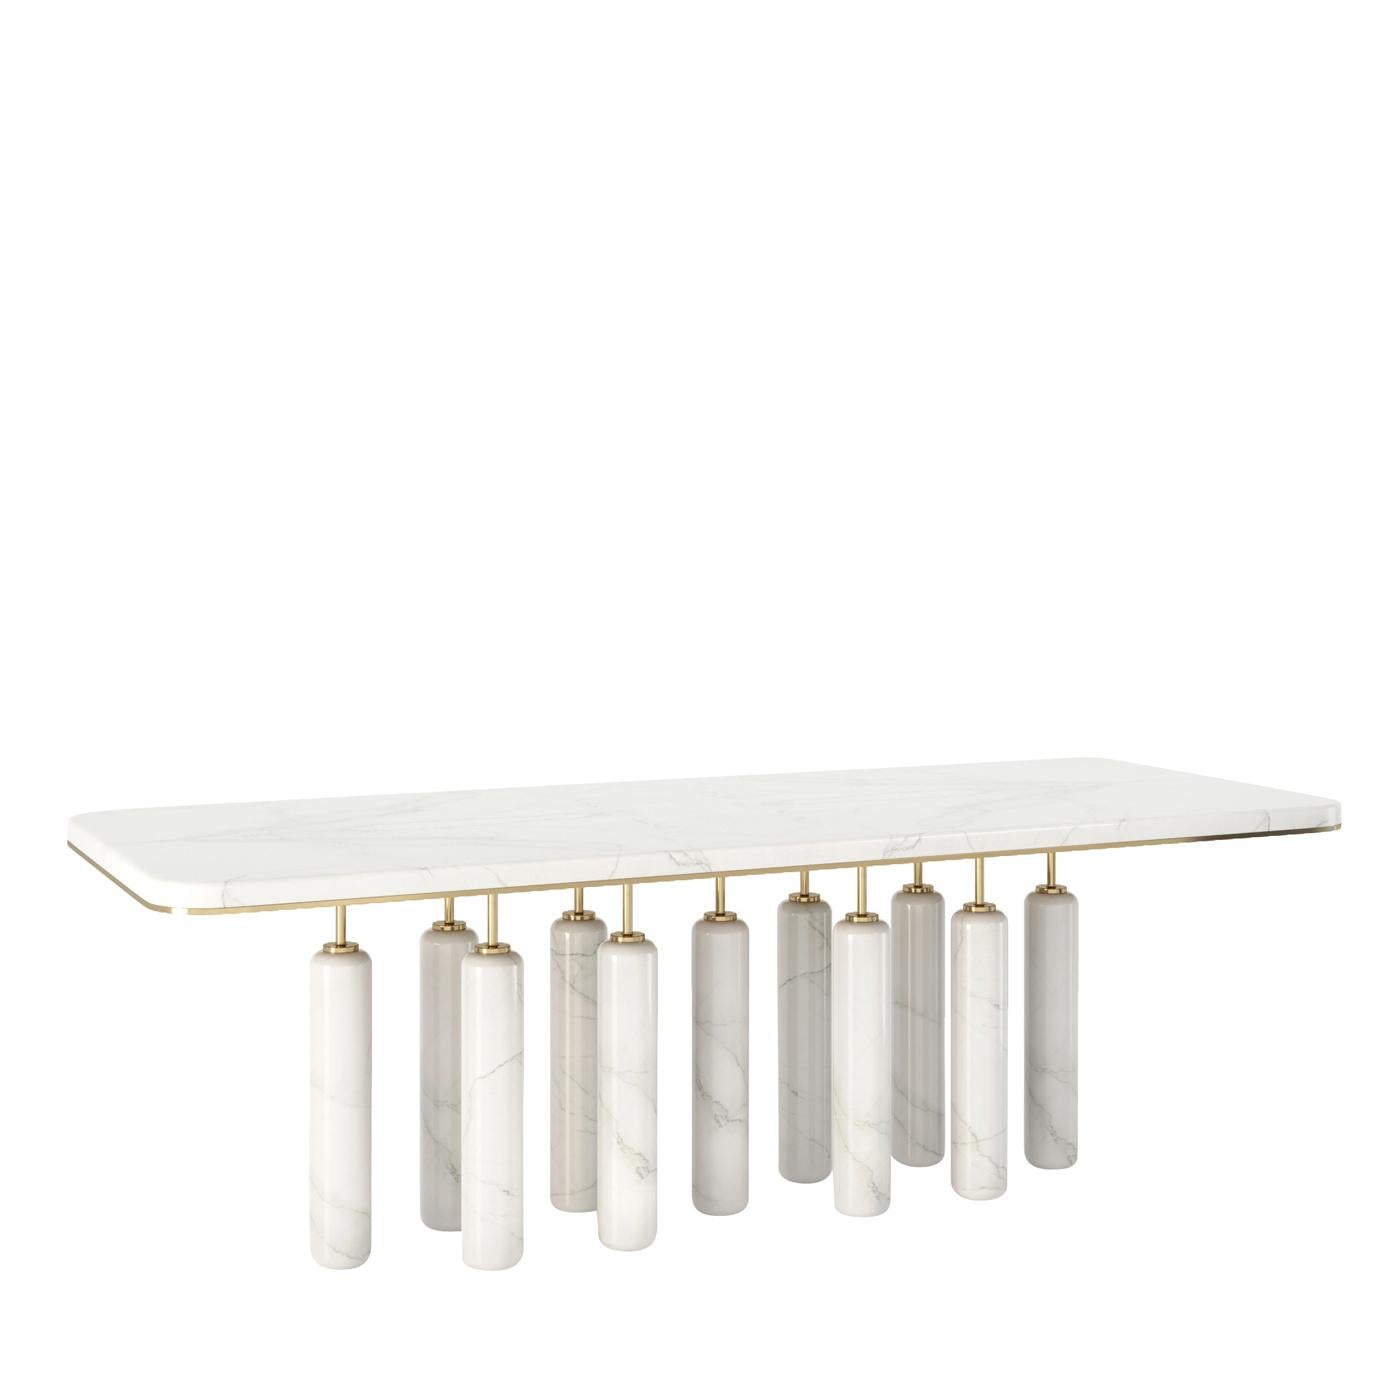 Showcasing a majestic and sculptural silhouette, this sophisticated dinner table will be an eye-catching piece in the most refined interiors. The rectangular marble top with beveled corners is embellished with a thin brass-finished metal frame and